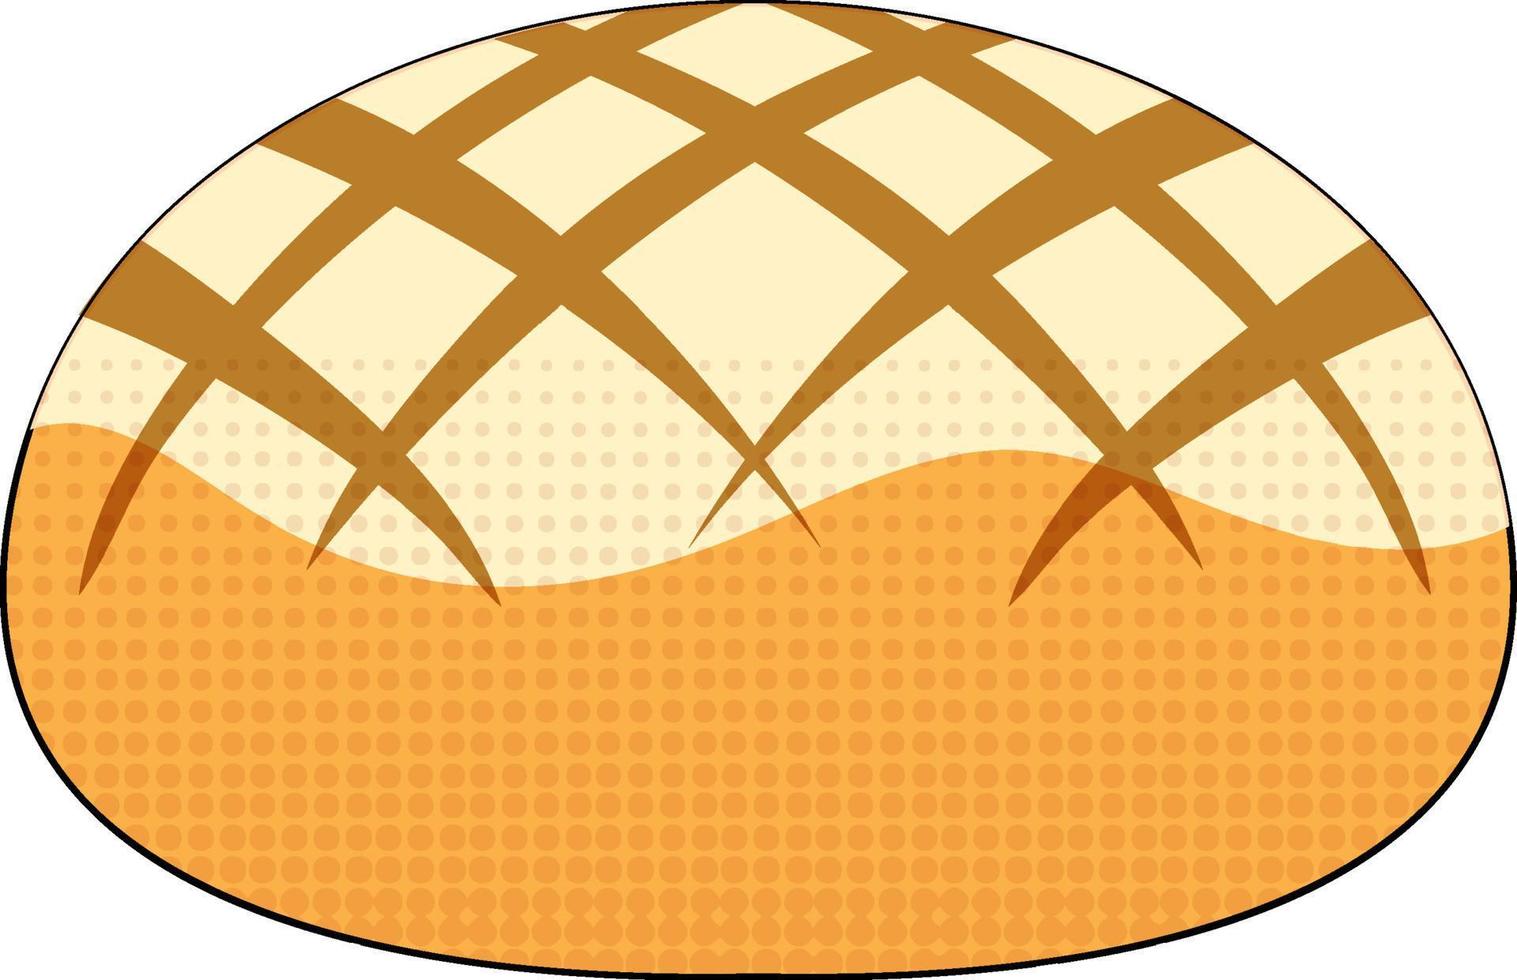 Bread on white background vector